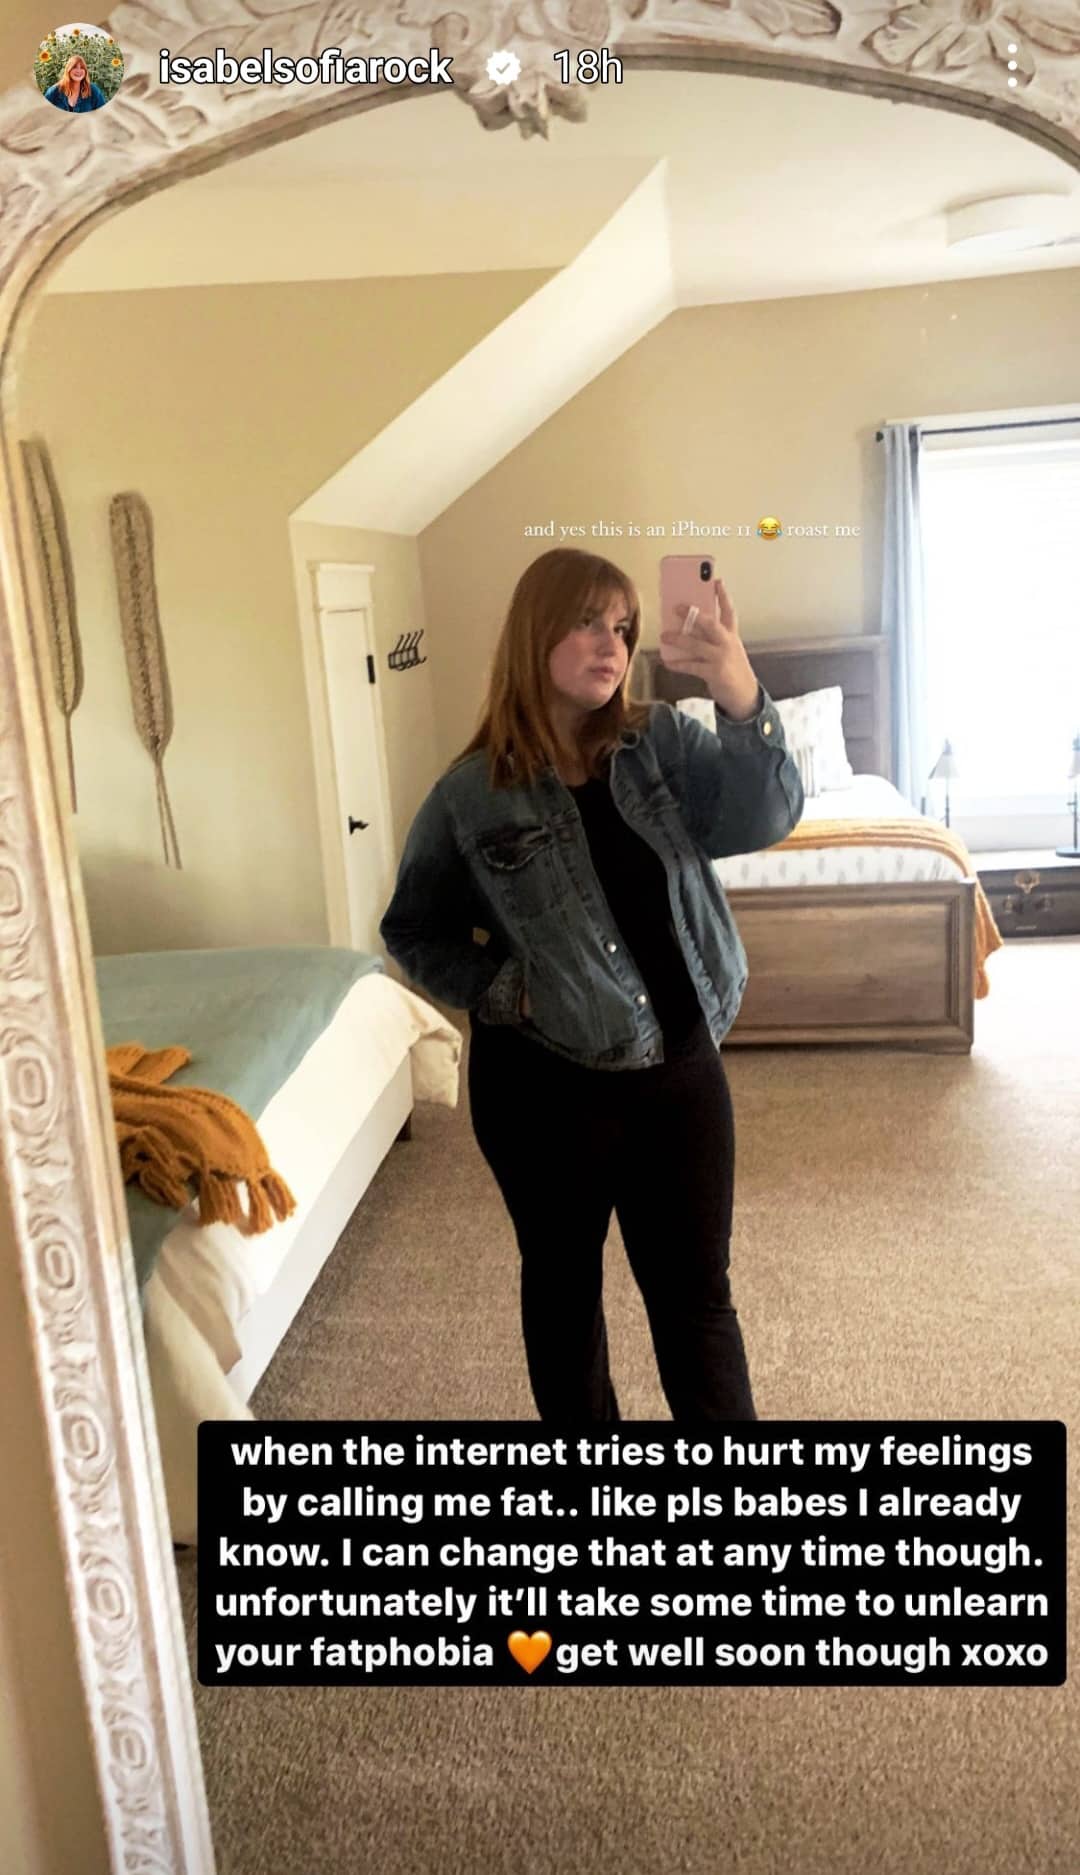 isabel roloff responds to fat-shamers in her instagram story